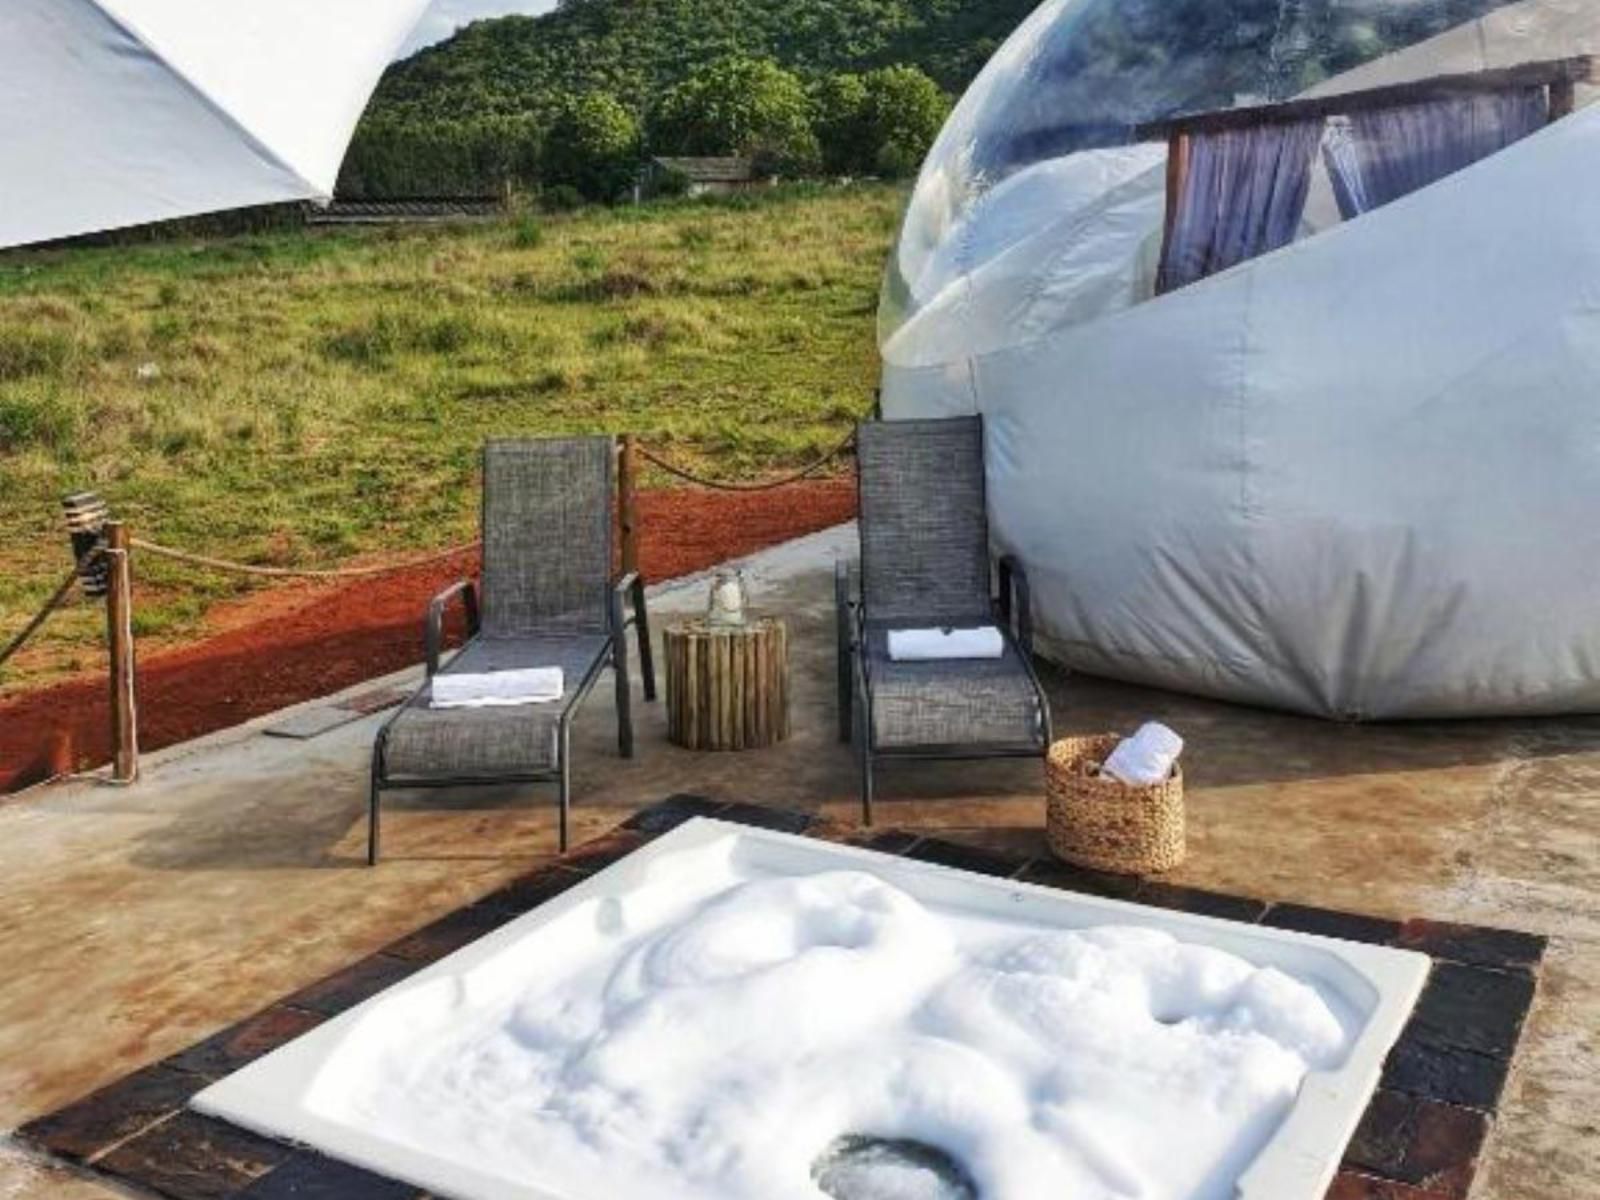 The Bubble Valley Piet Retief Mpumalanga South Africa Tent, Architecture